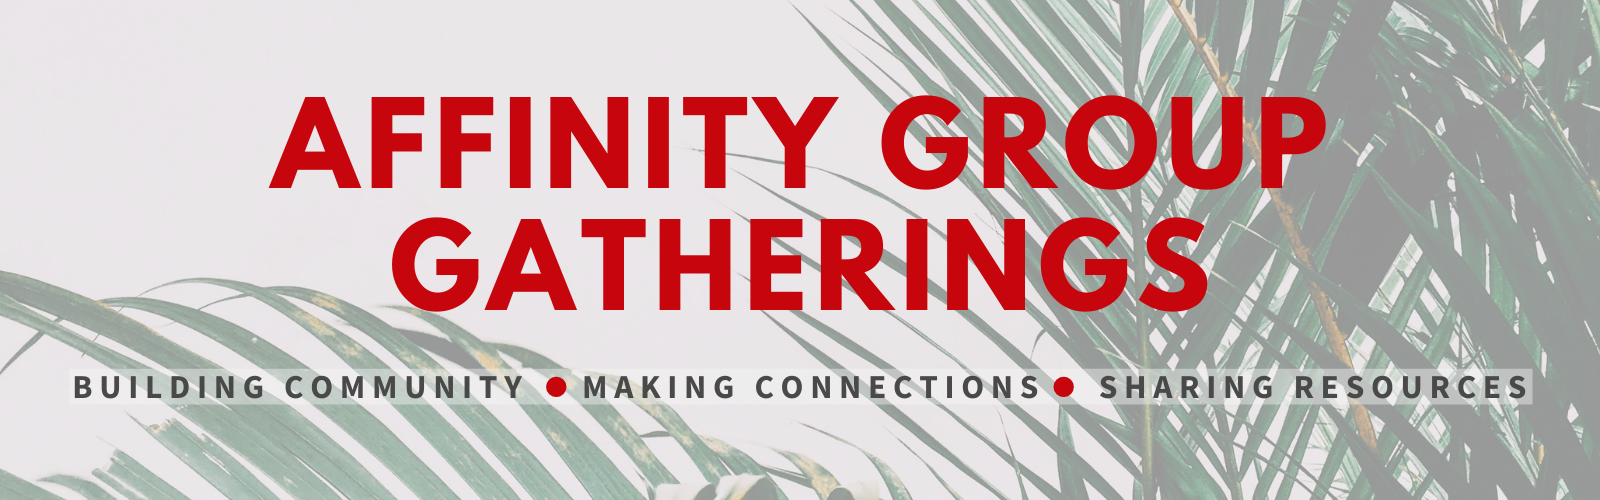 An image of fern fronds with the words "Affinity Group Gatherings: Building Community, Making Connections, Sharing Resources"